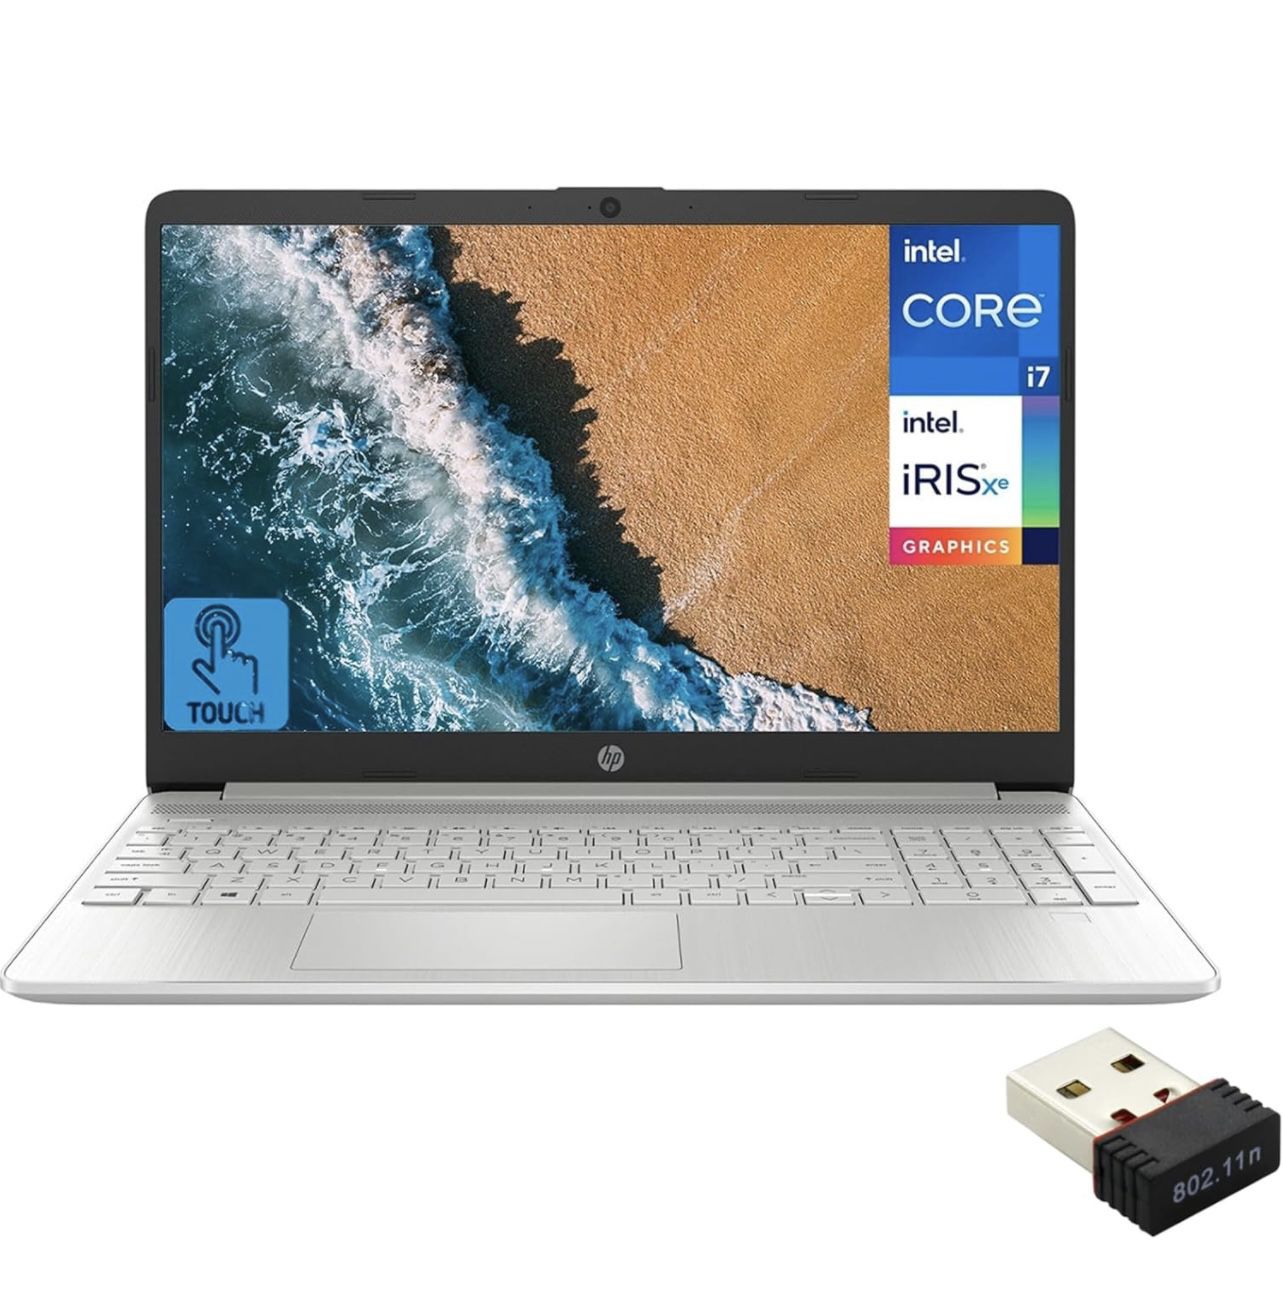 HP - 15.6" Touch-Screen Full HD Laptop - Intel Core i7 - 16GB Memory - 512GB SSD - Natural Silver